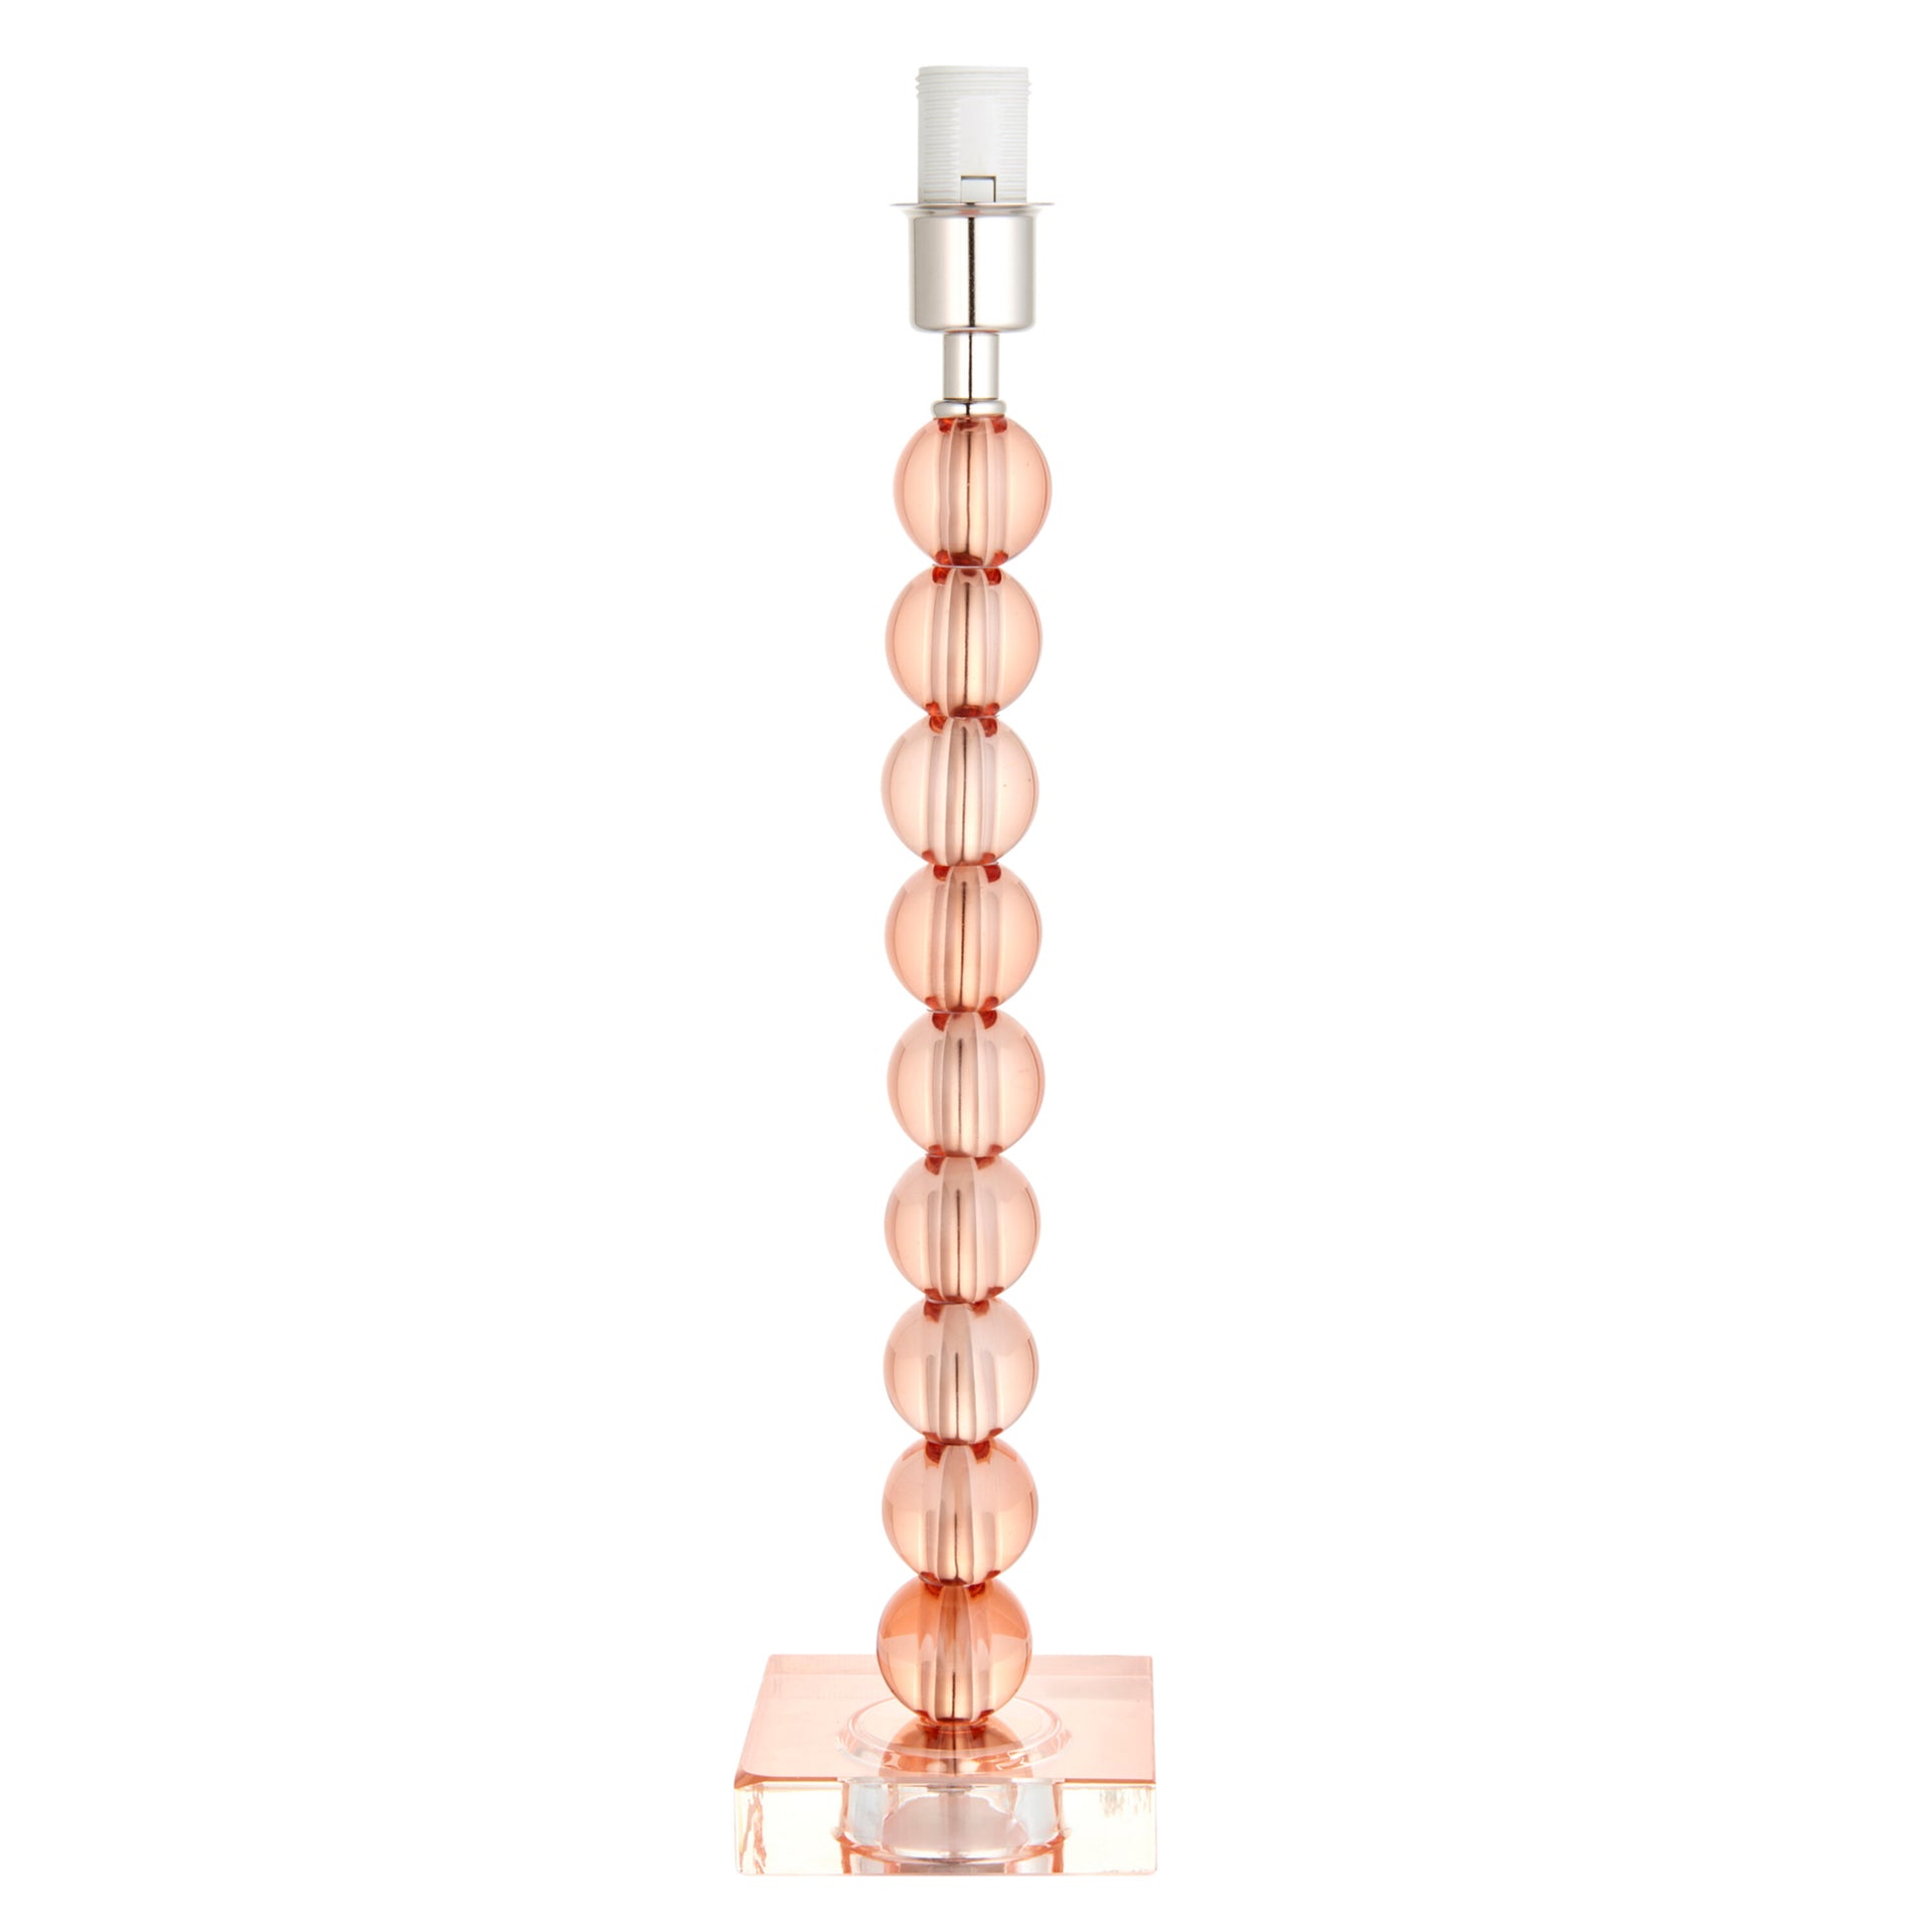 Adelie 1 Table Lamp | Blush Tinted